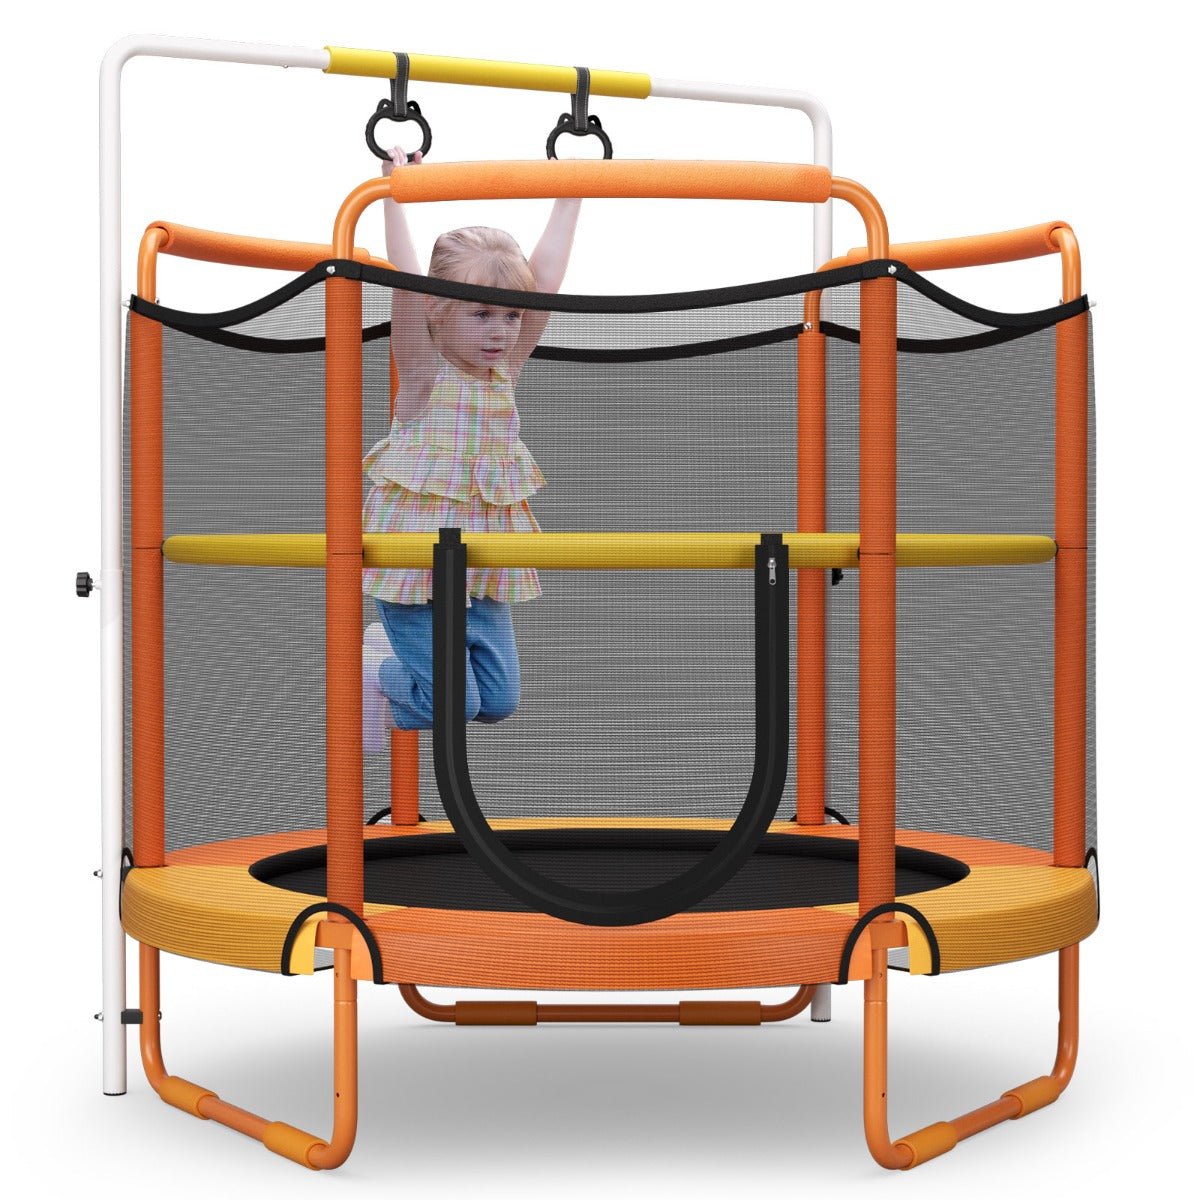 Unlimited Fun: 152cm Kids Trampoline 3-in-1 Game Set with Enclosure Net